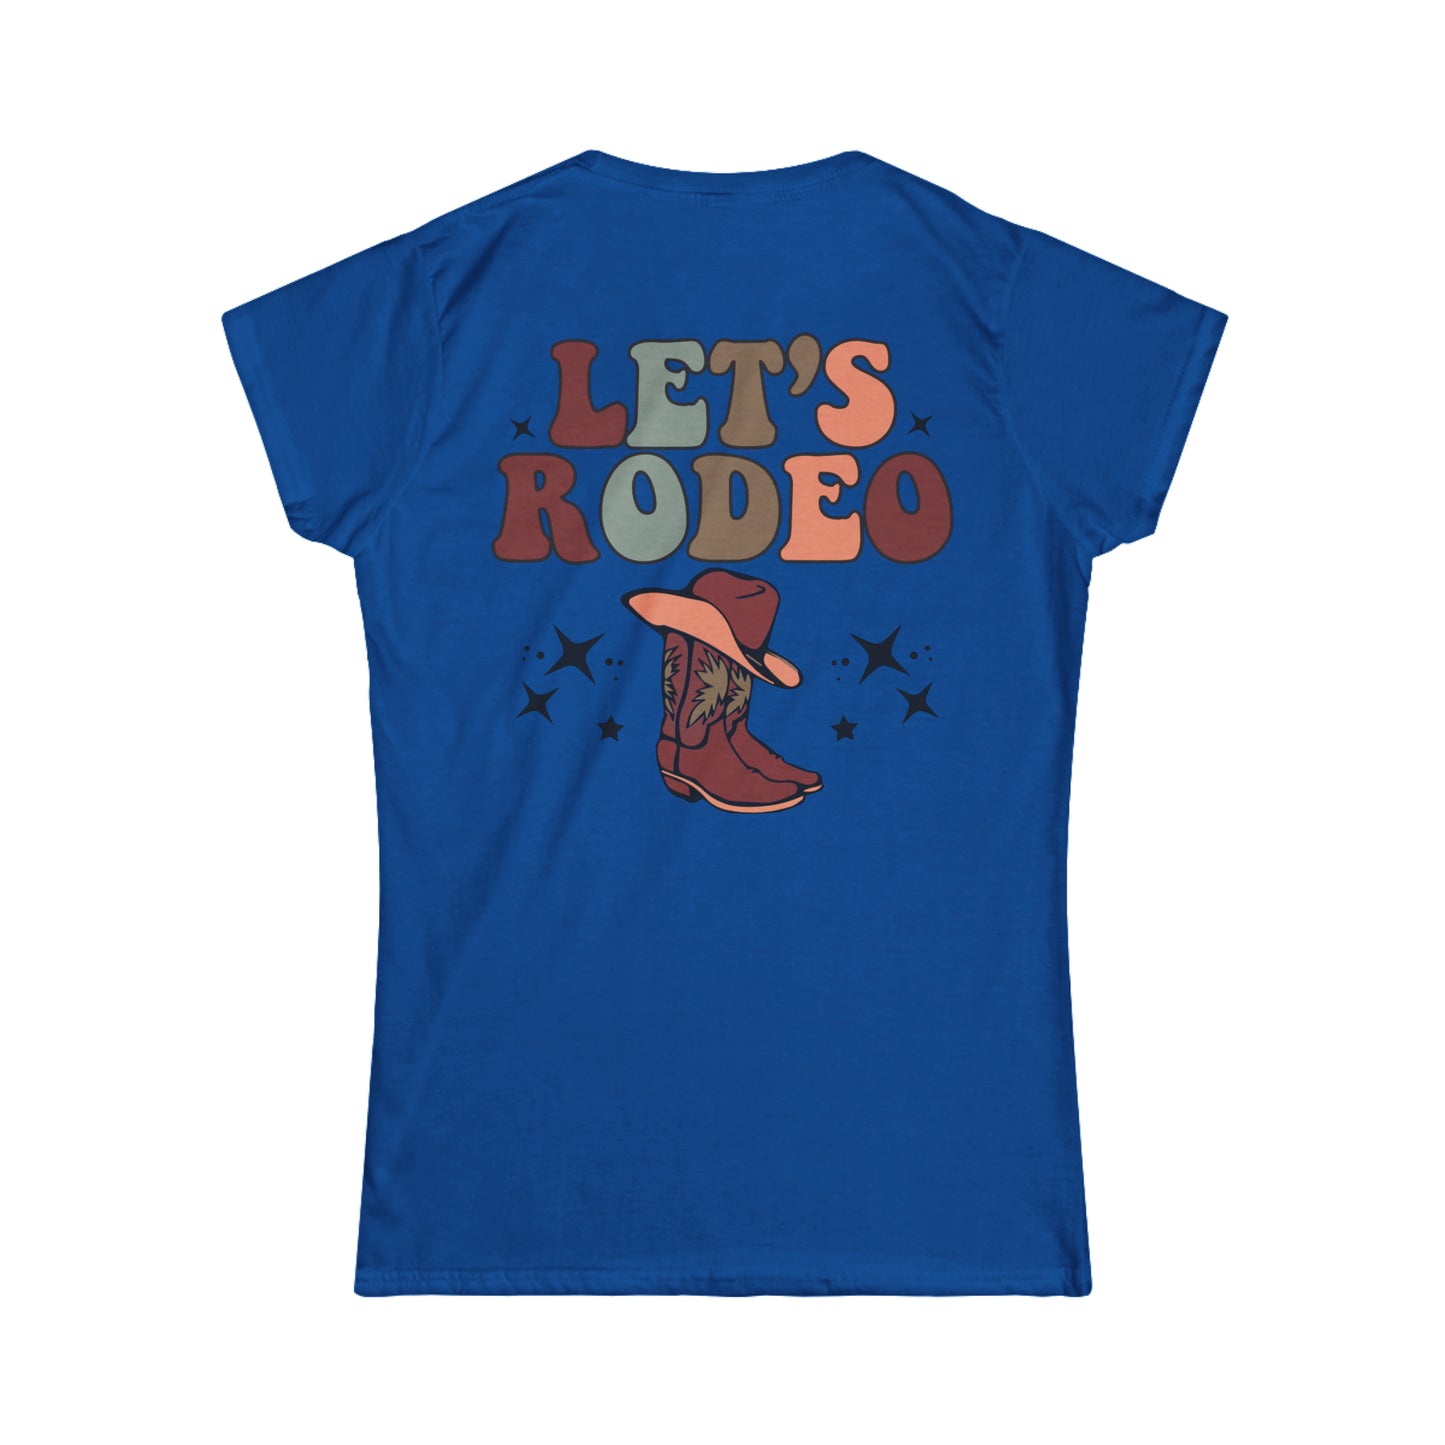 Softstyle Lets Rodeo Tee